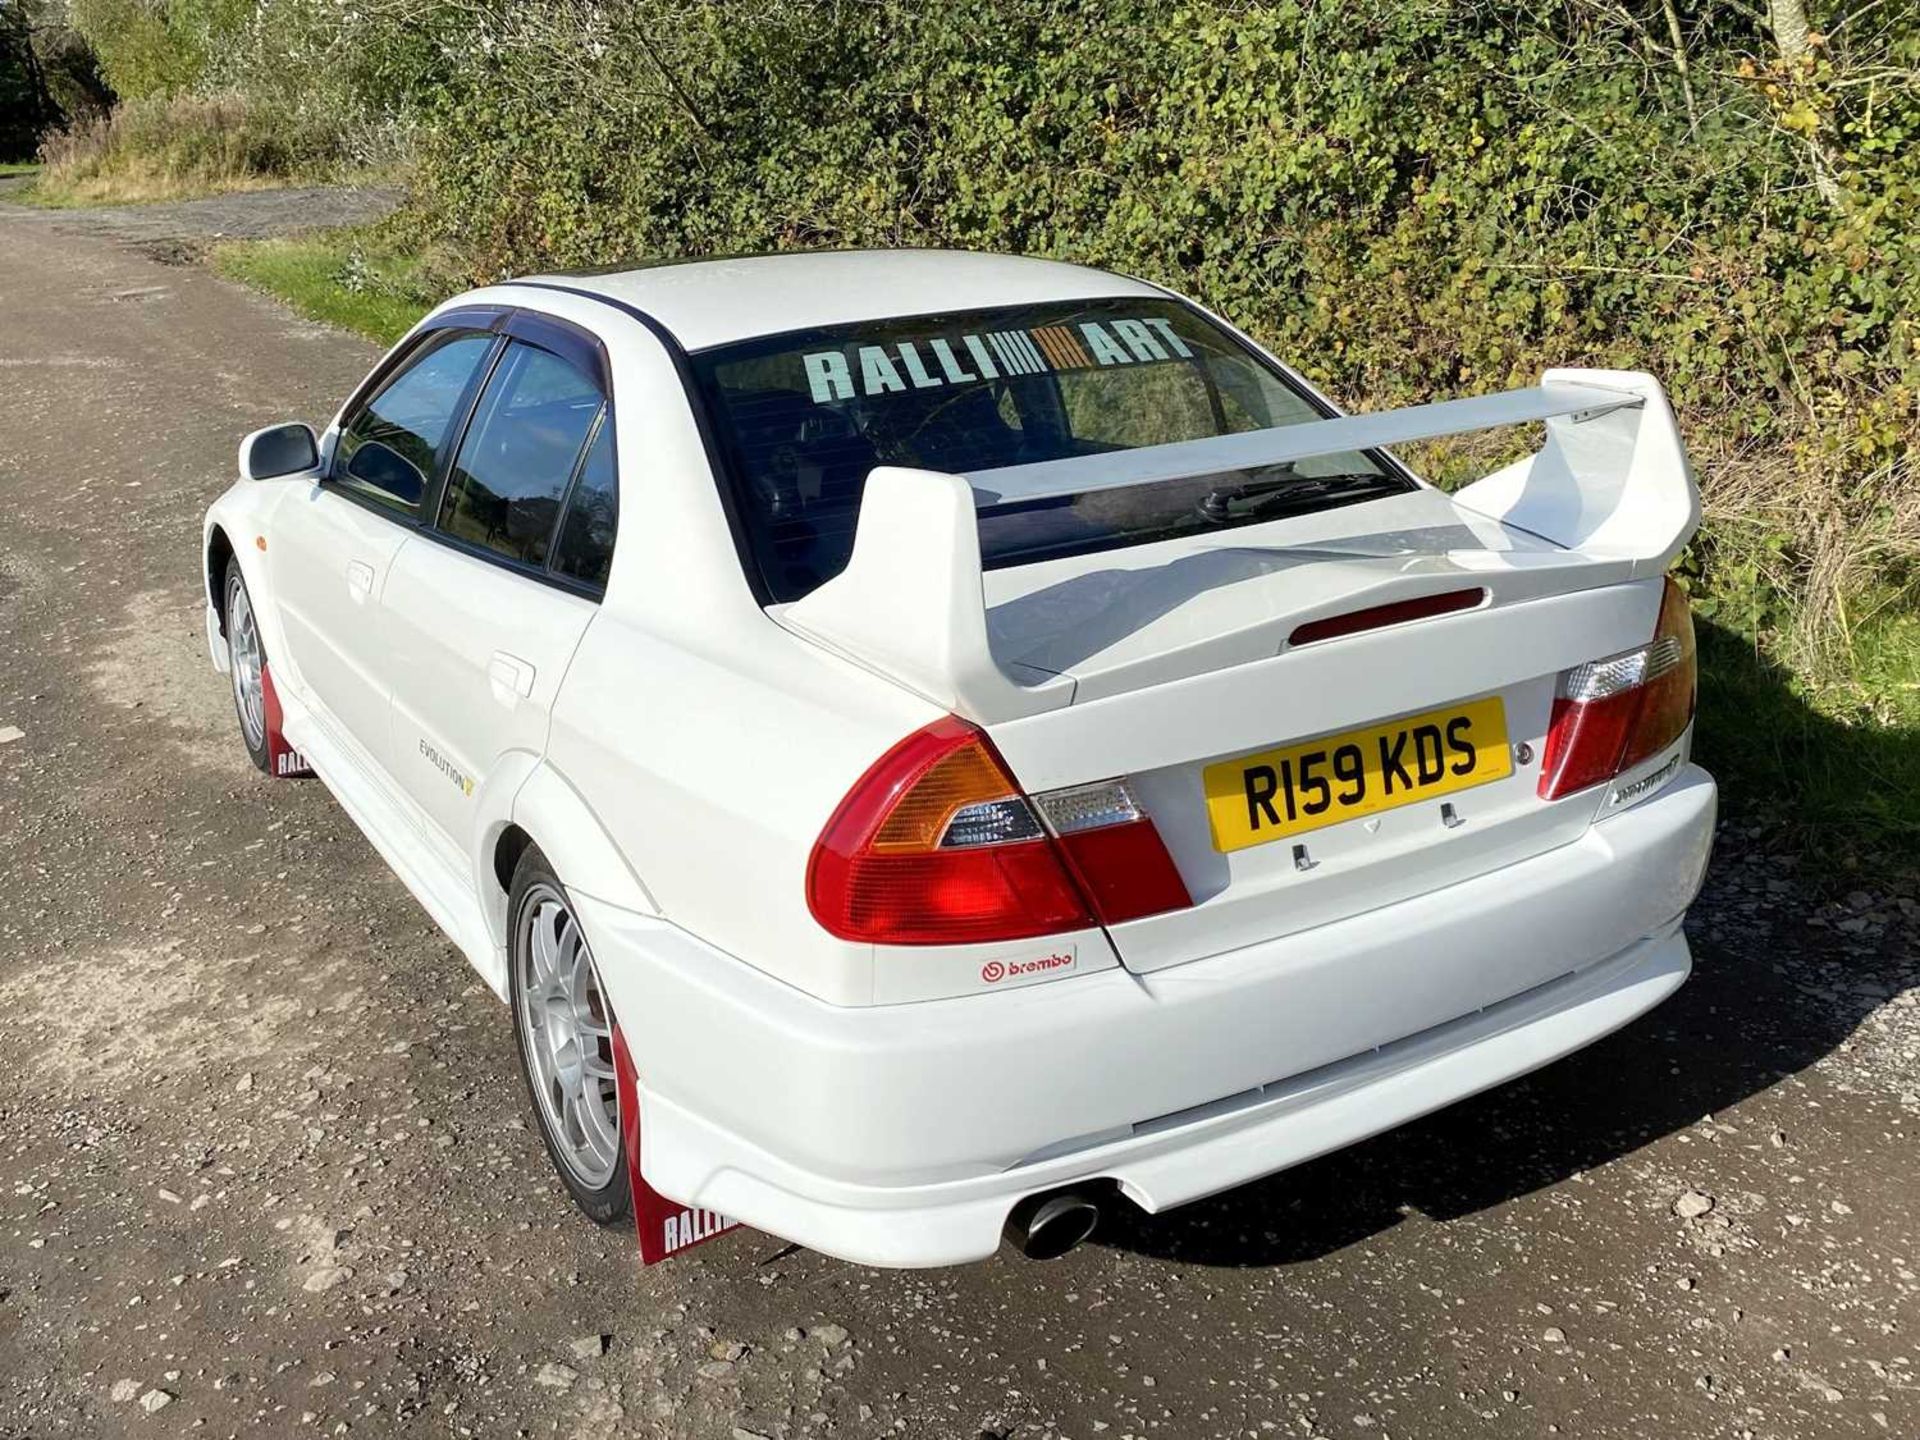 1998 Mitsubishi Lancer Evolution V GSR One UK keeper since being imported two years ago - Image 22 of 100